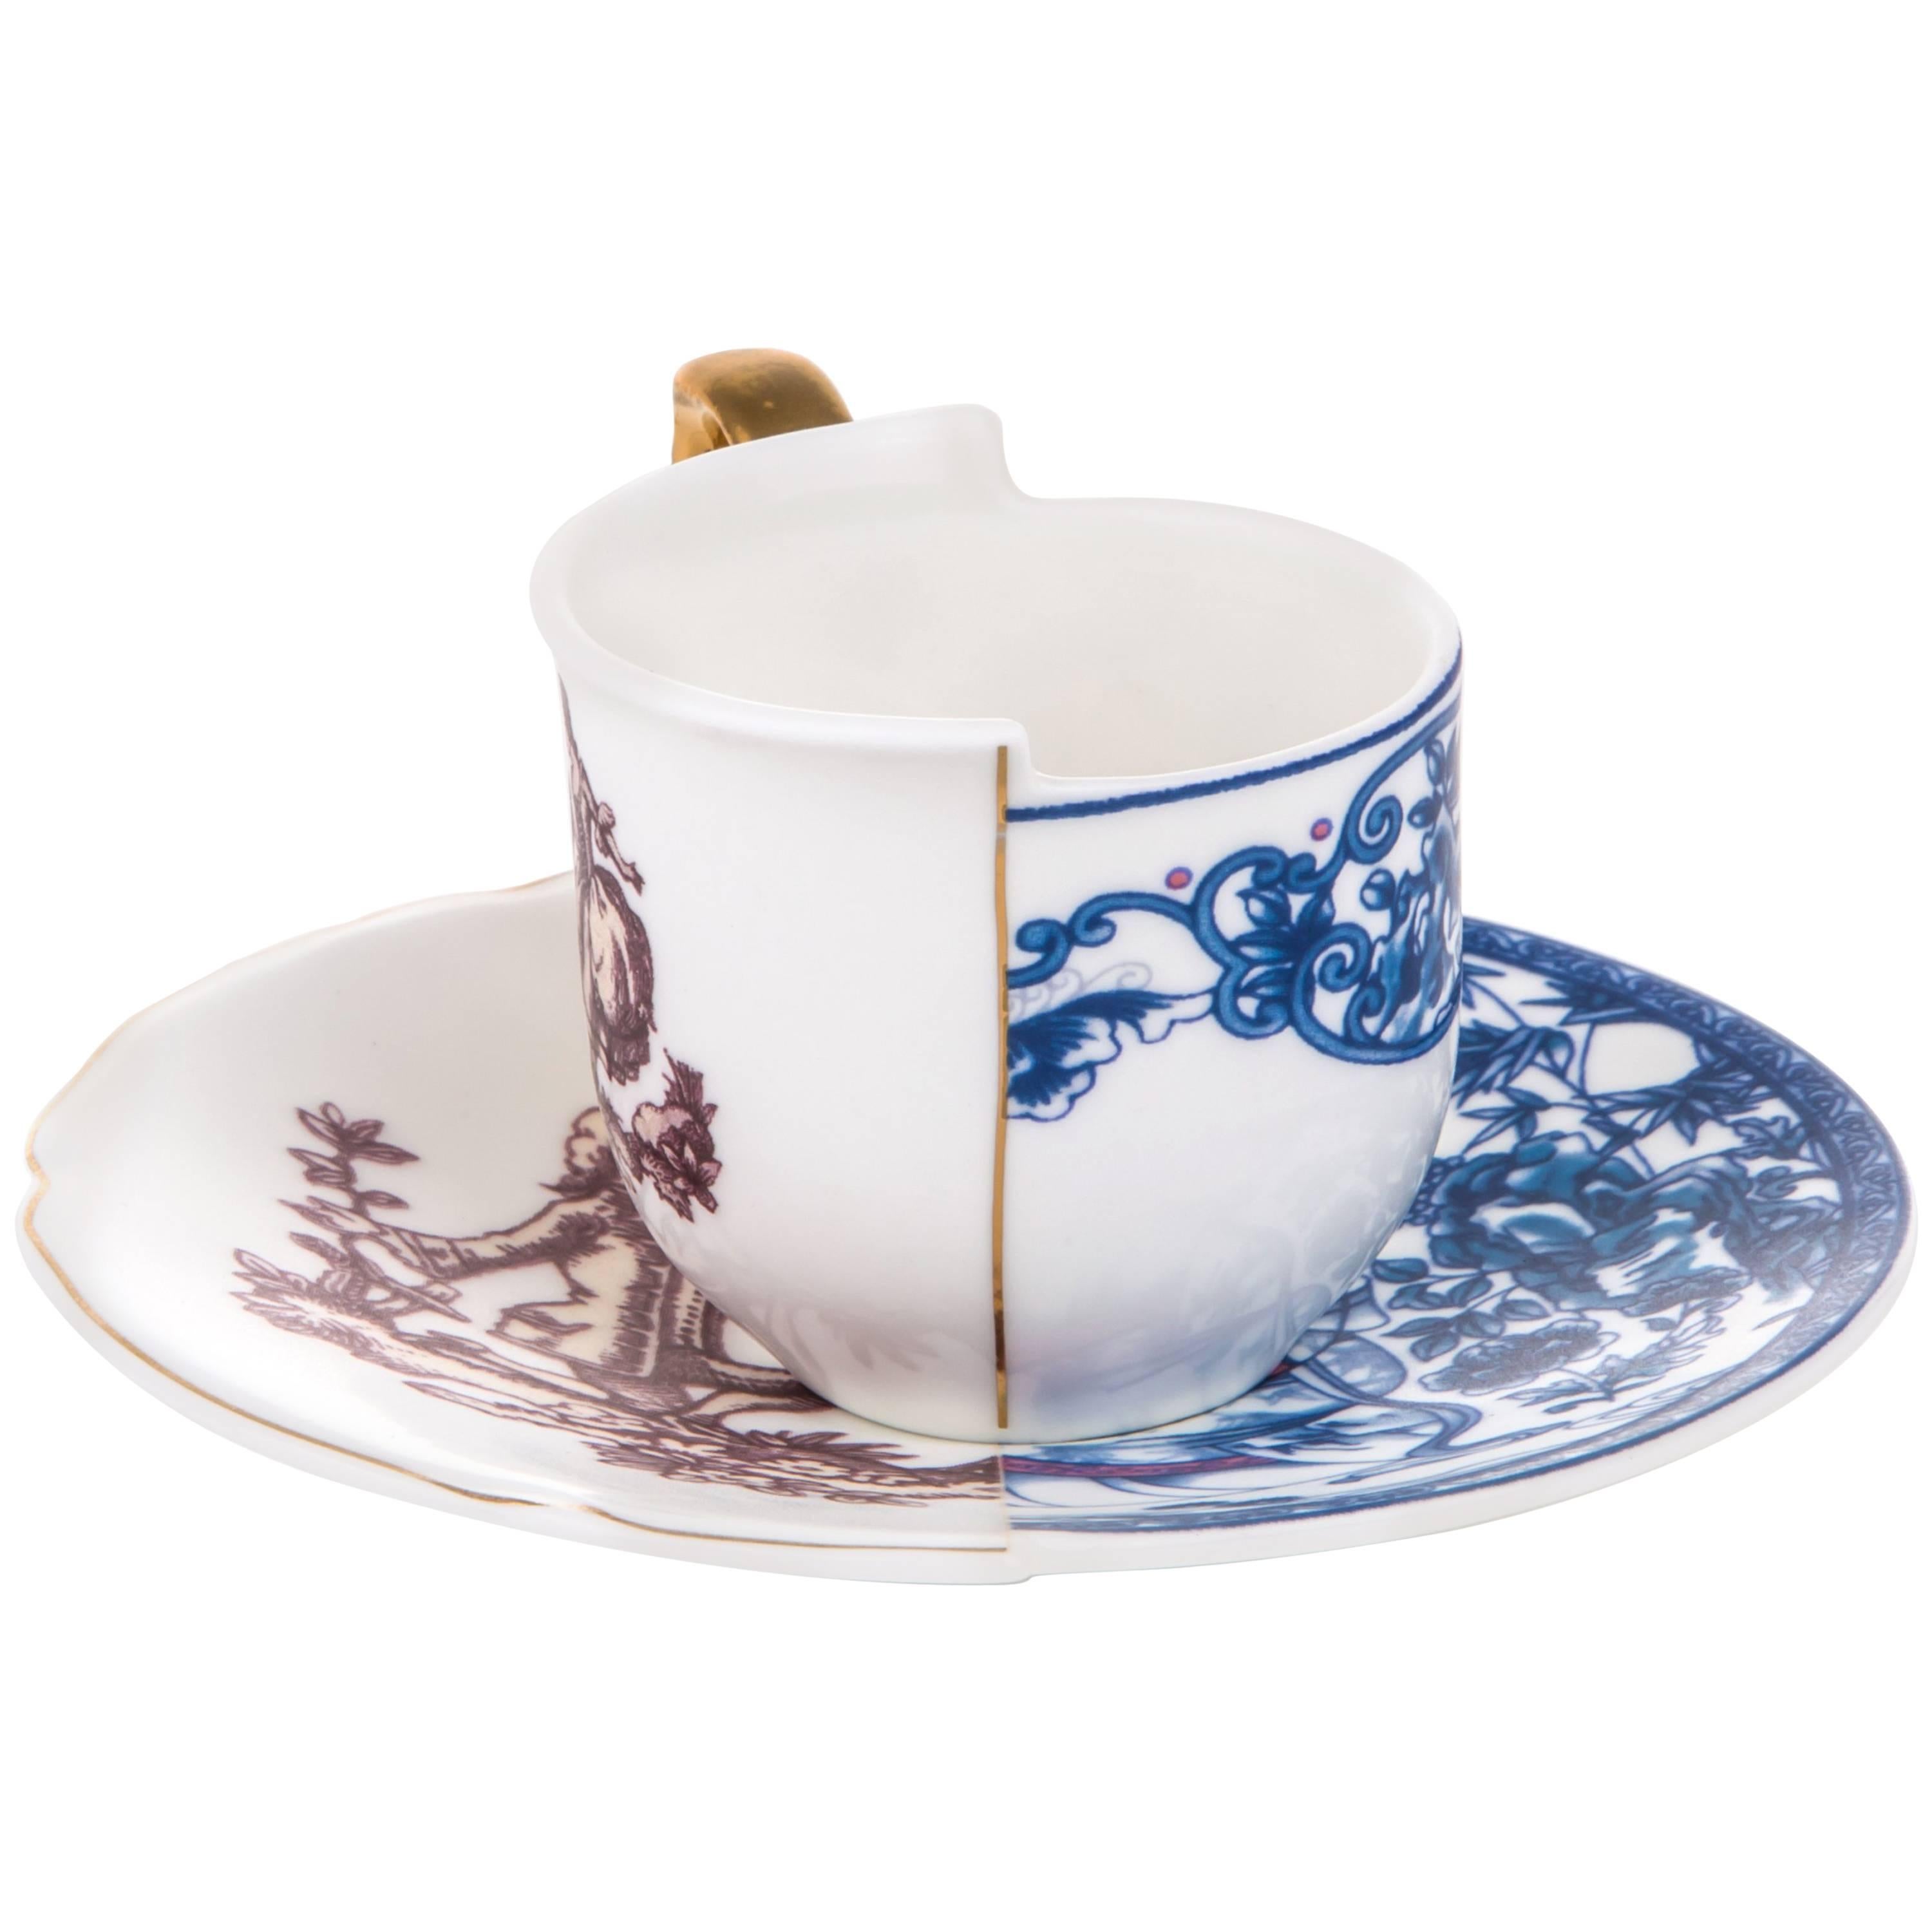 Seletti "Hybrid-Eufemia" Coffee Cup with Saucer in Porcelain